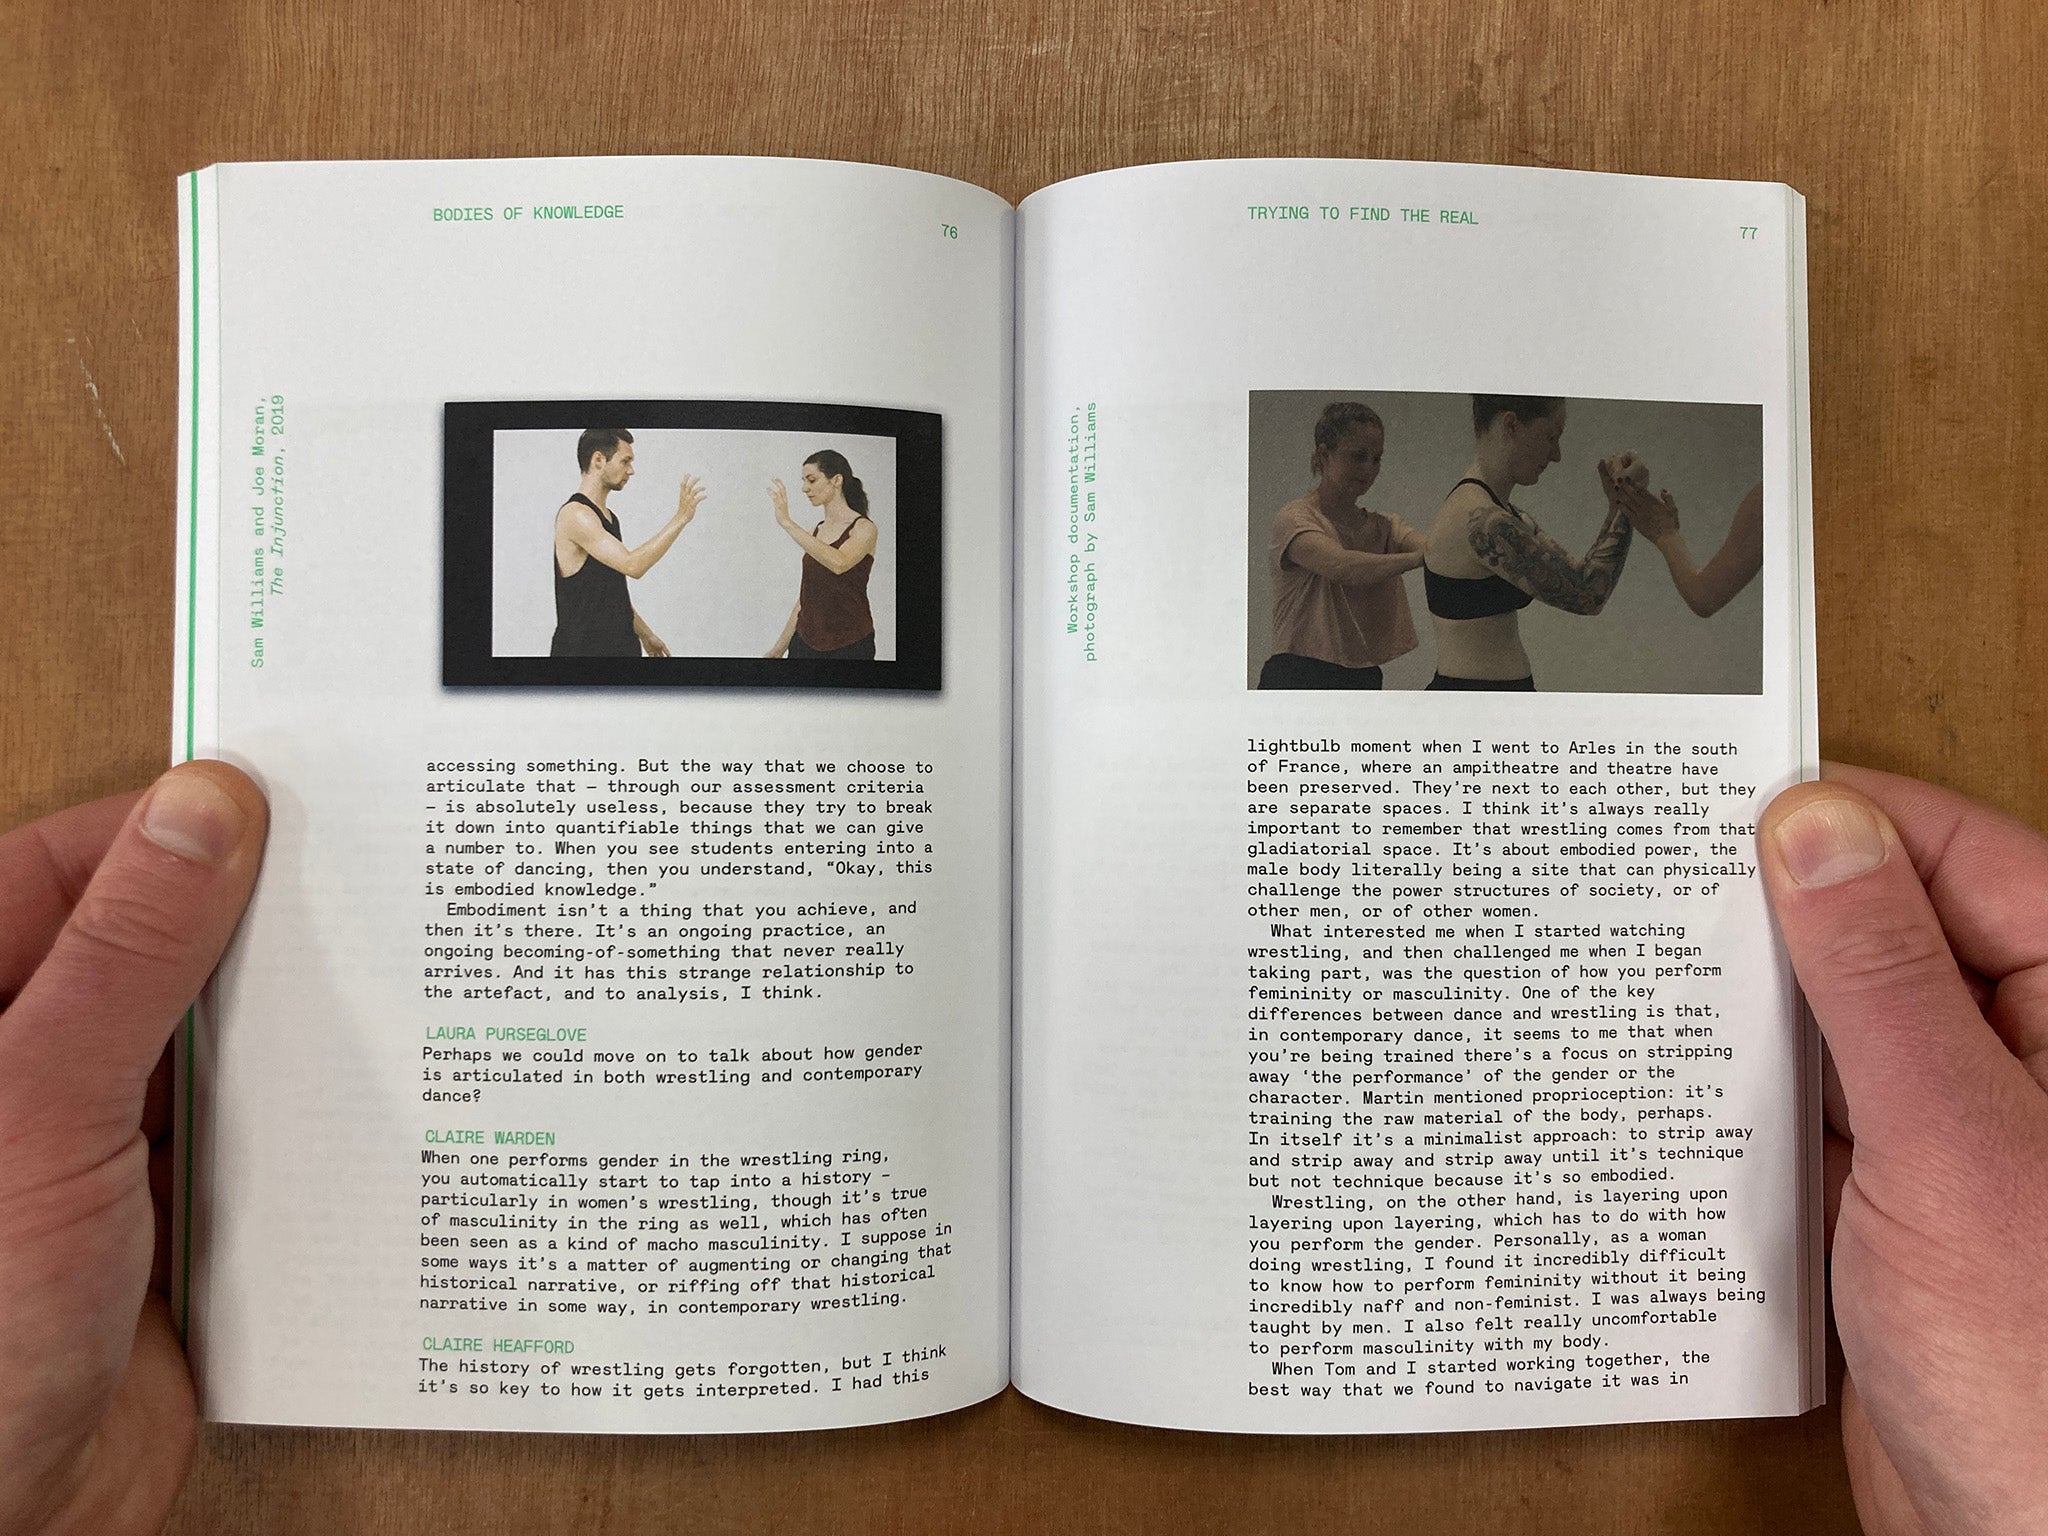 BODIES OF KNOWLEDGE: THREE CONVERSATIONS ON MOVEMENT, COMMUNICATION AND IDENTITY by Laura Purseglove